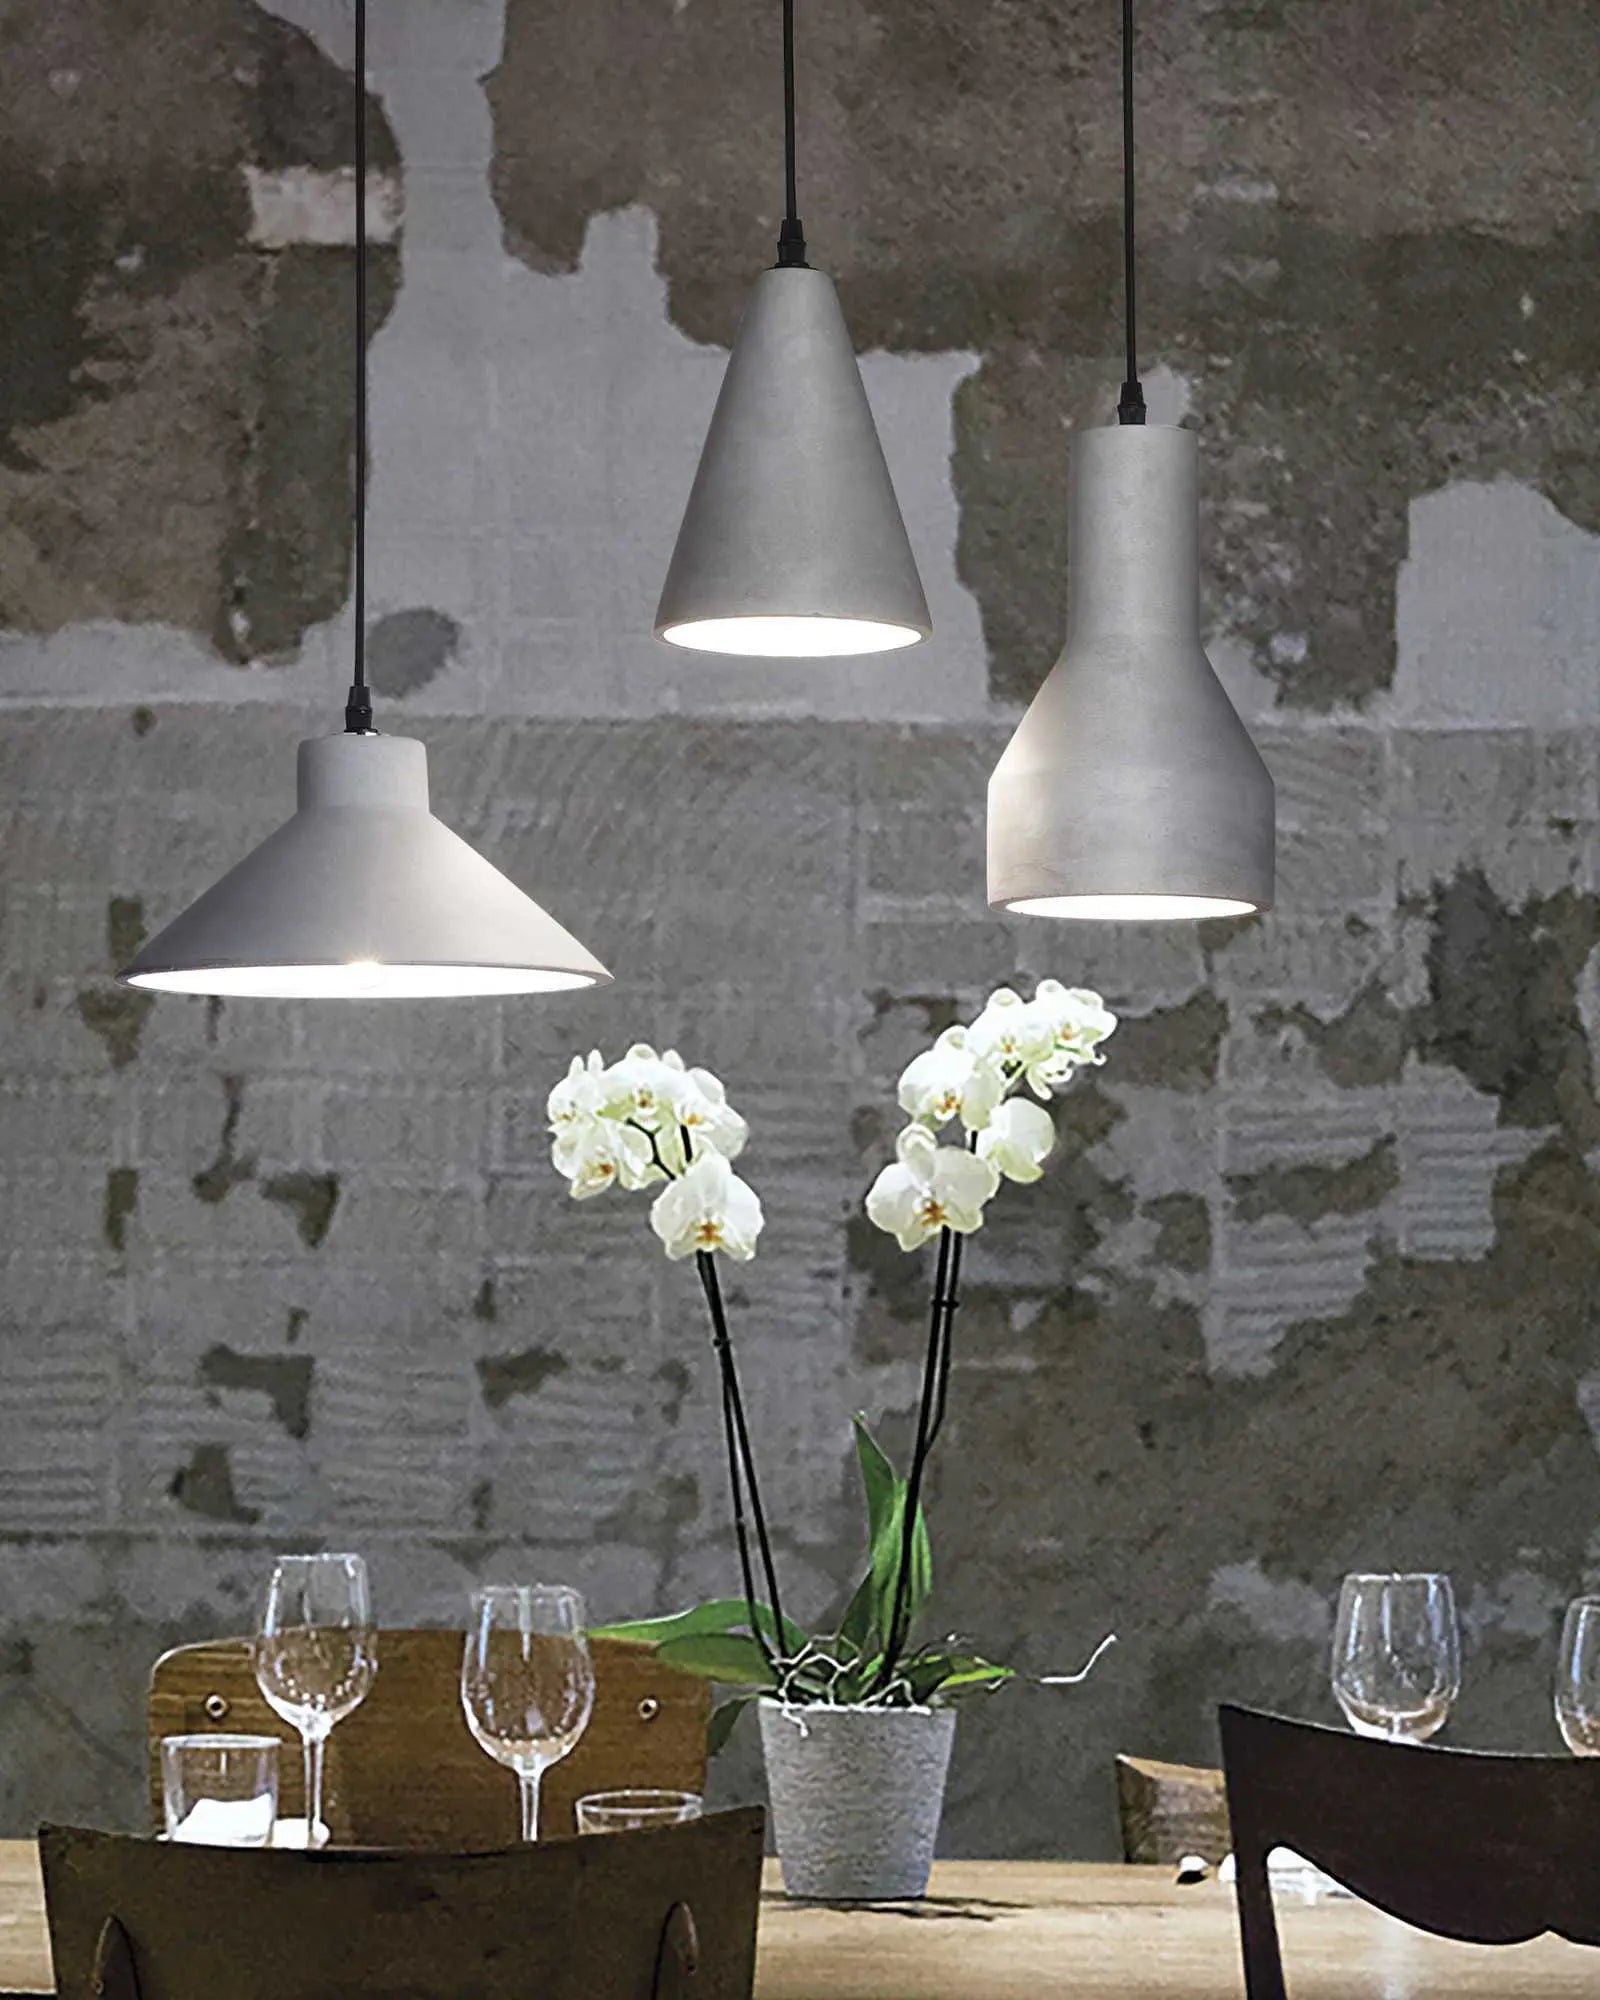 Oil Pendant light cluster above the table